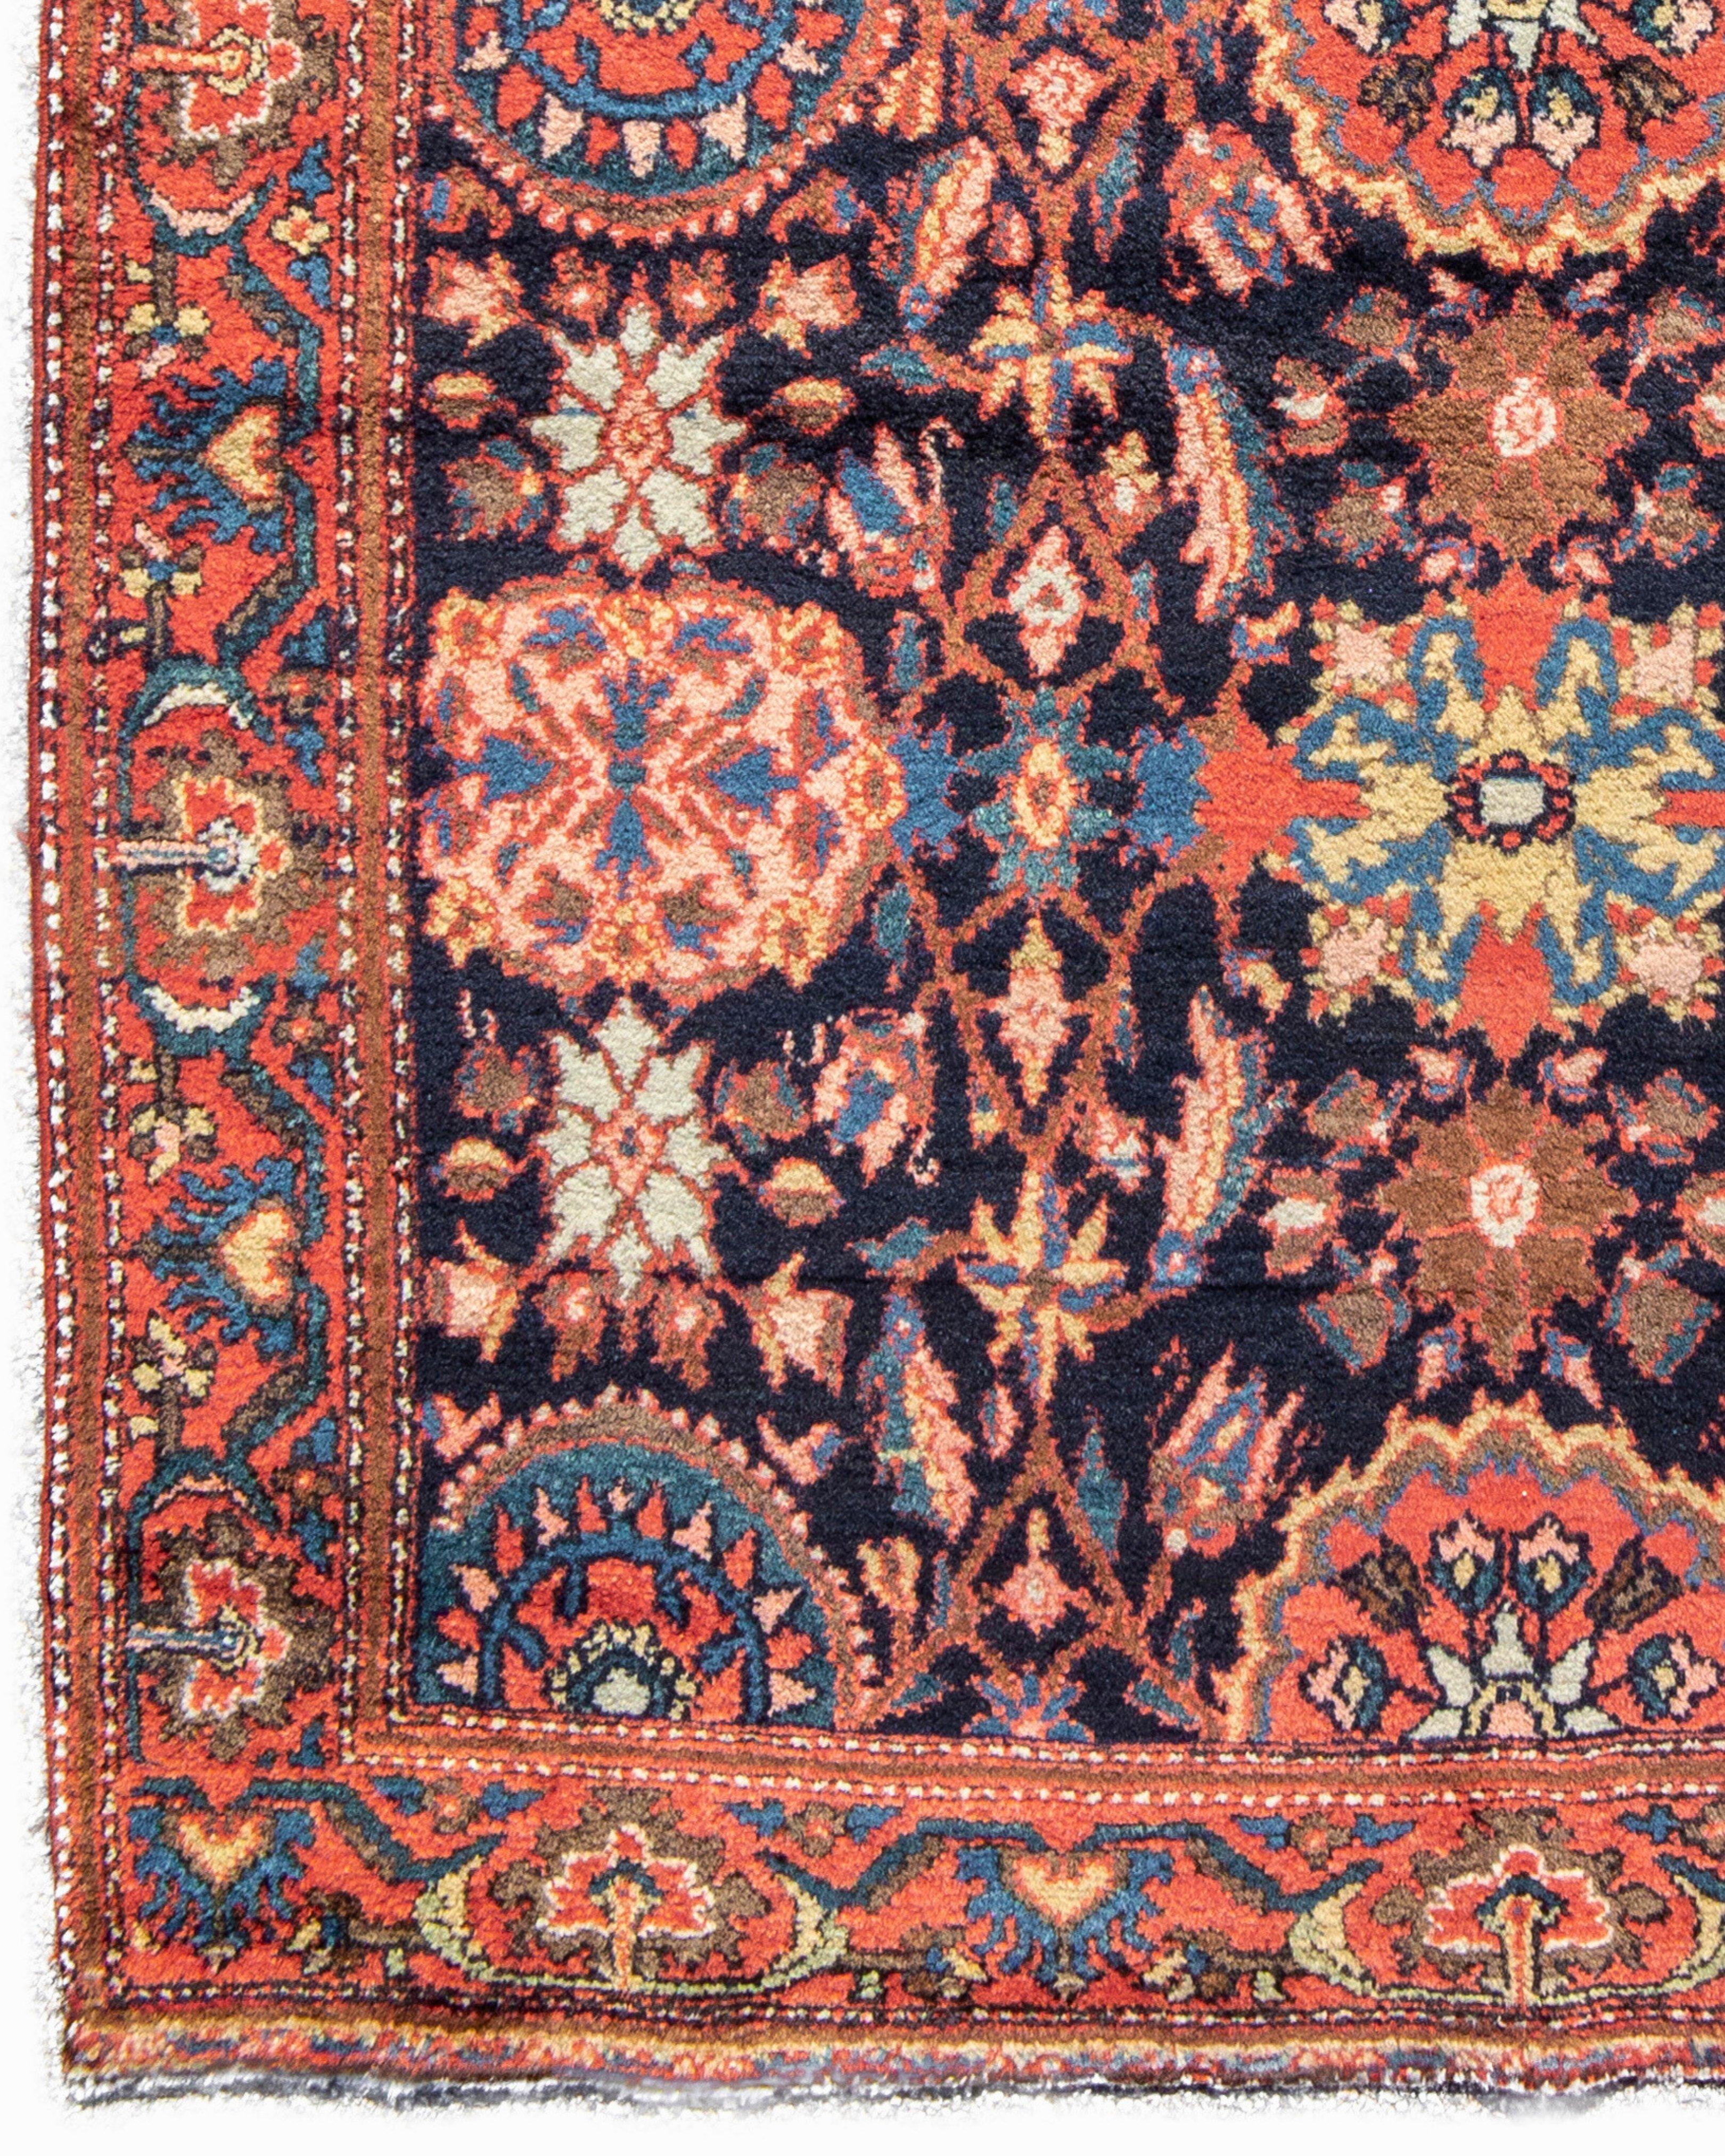 Antique Persian Malayer Rug, c. 1900 In Excellent Condition For Sale In San Francisco, CA